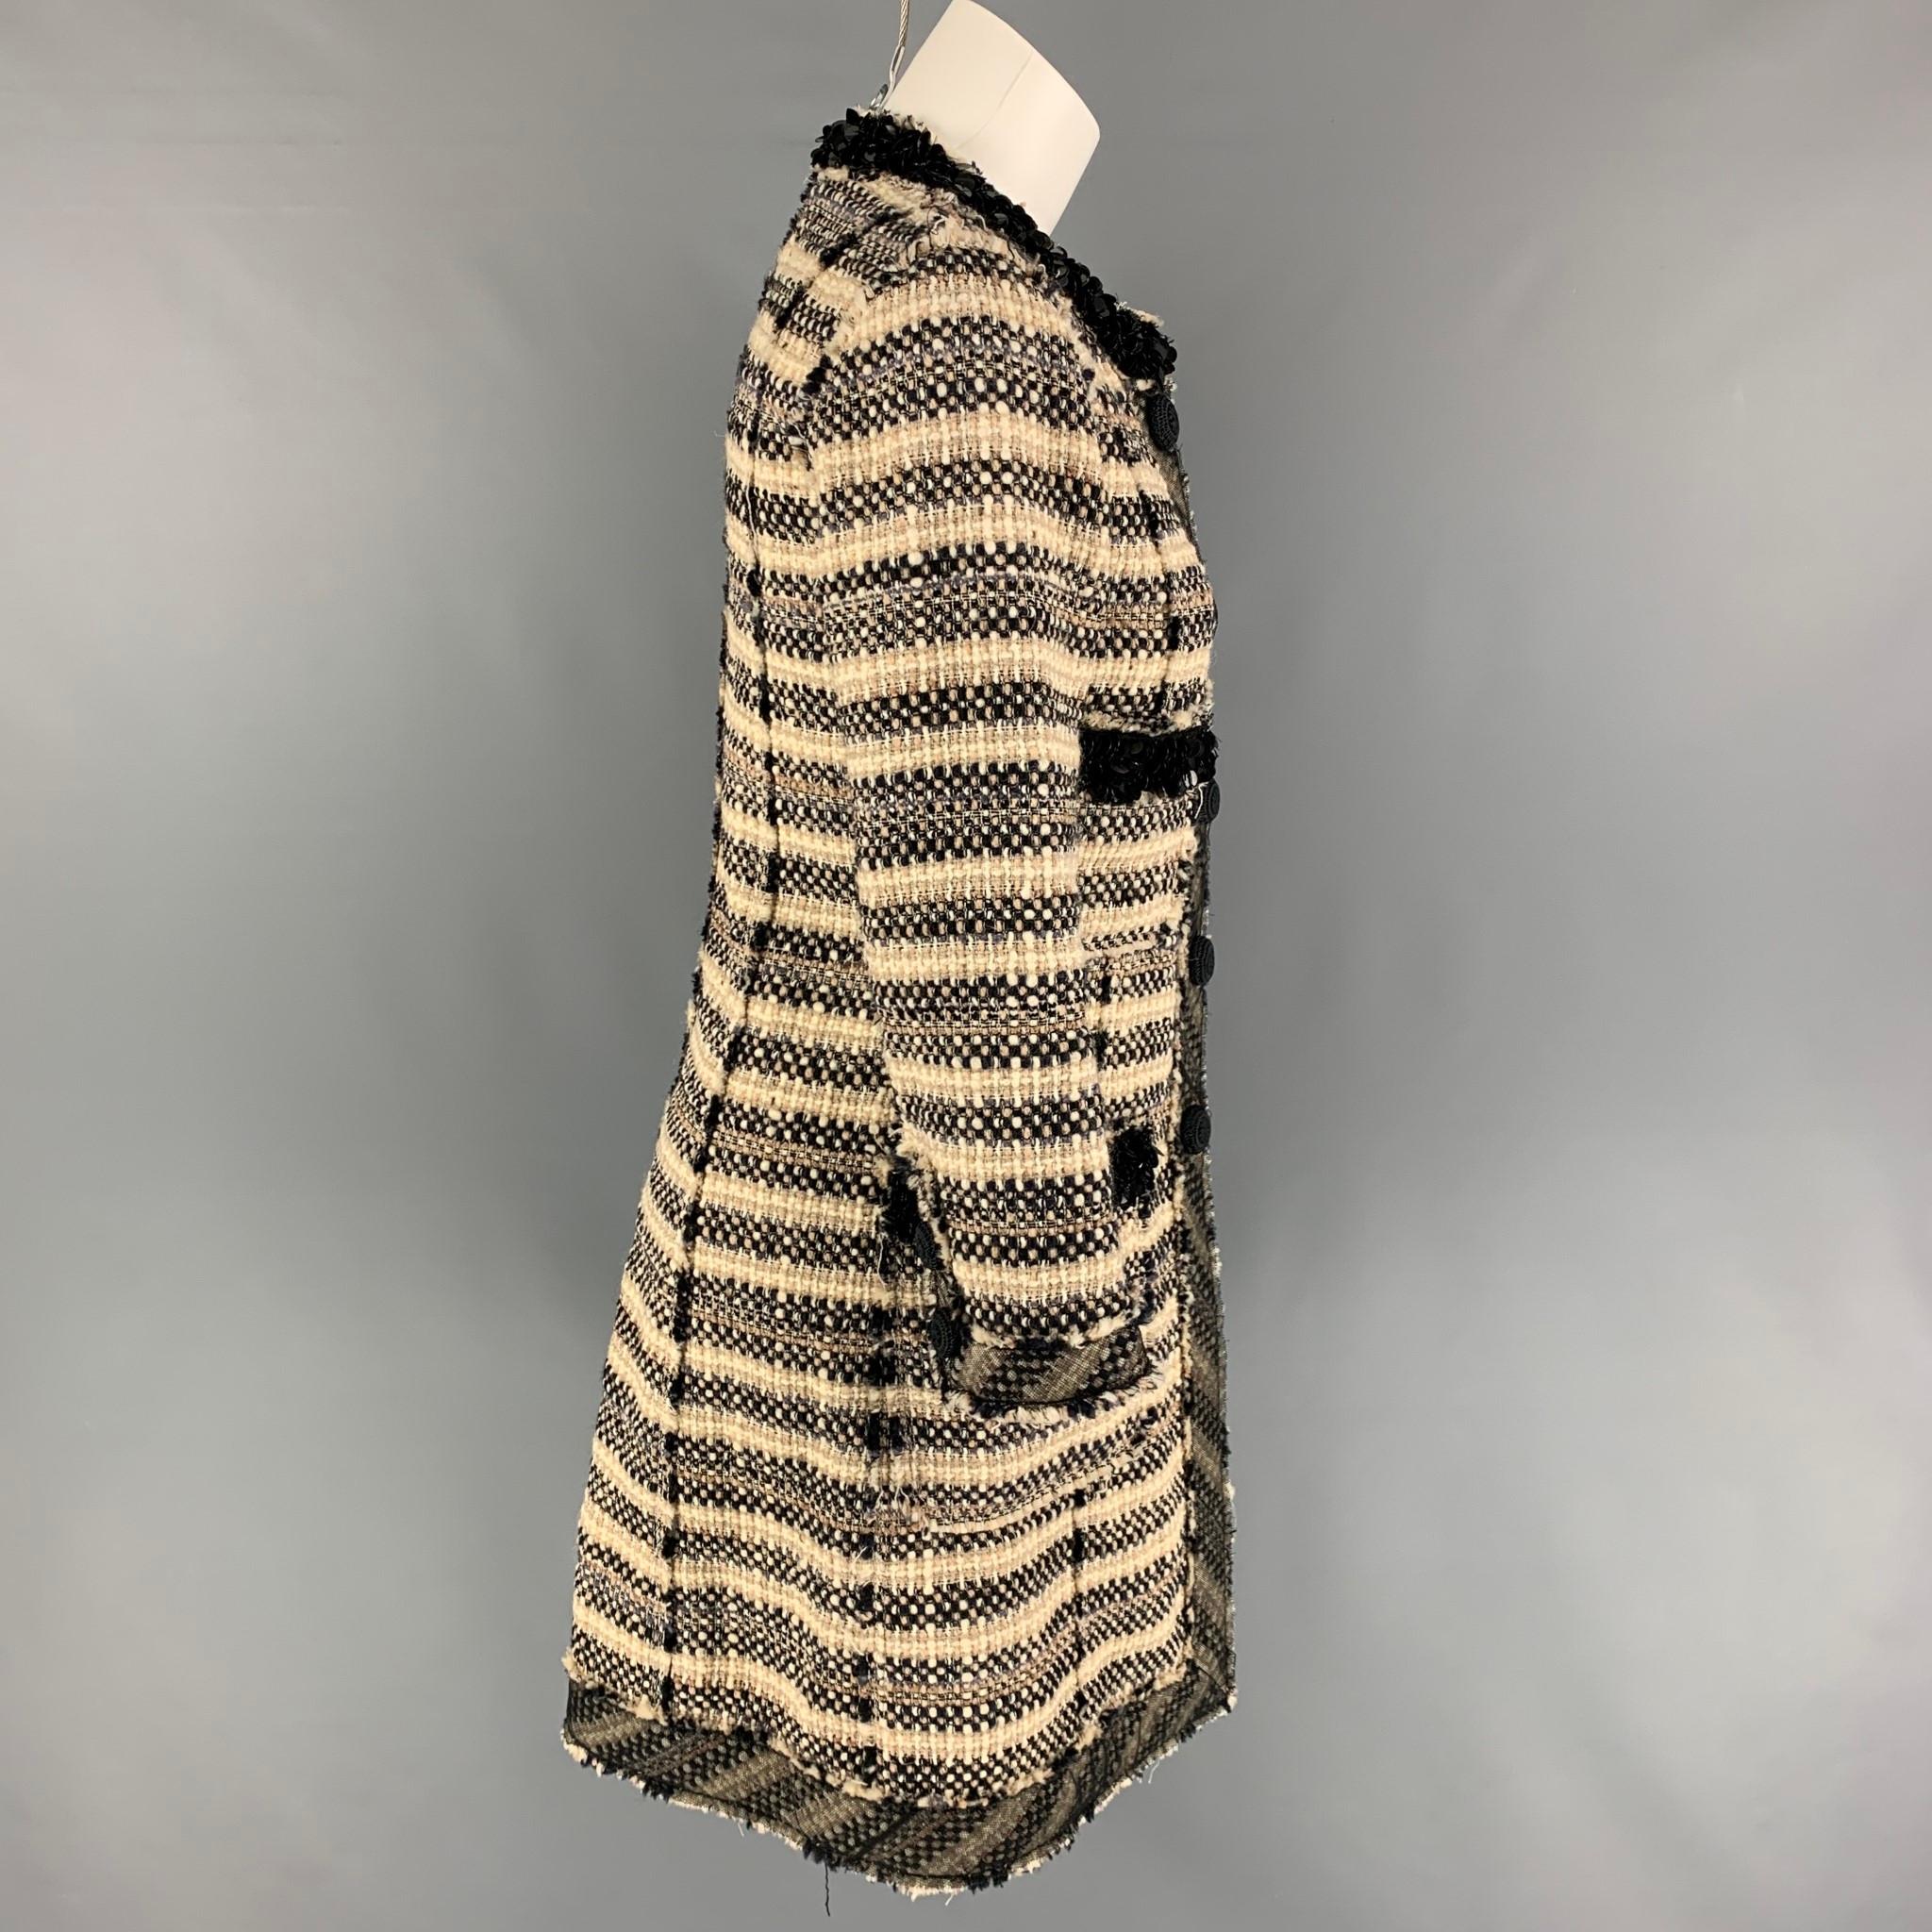 MARC JACOBS coat comes in a beige & black tweed wool featuring a collarless style, sequin trim, patch pockets, and a snap button closure. 

Very Good Pre-Owned Condition.
Marked: 4

Measurements:

Shoulder: 15 in.
Bust: 34 in.
Sleeve: 21 in.
Length: